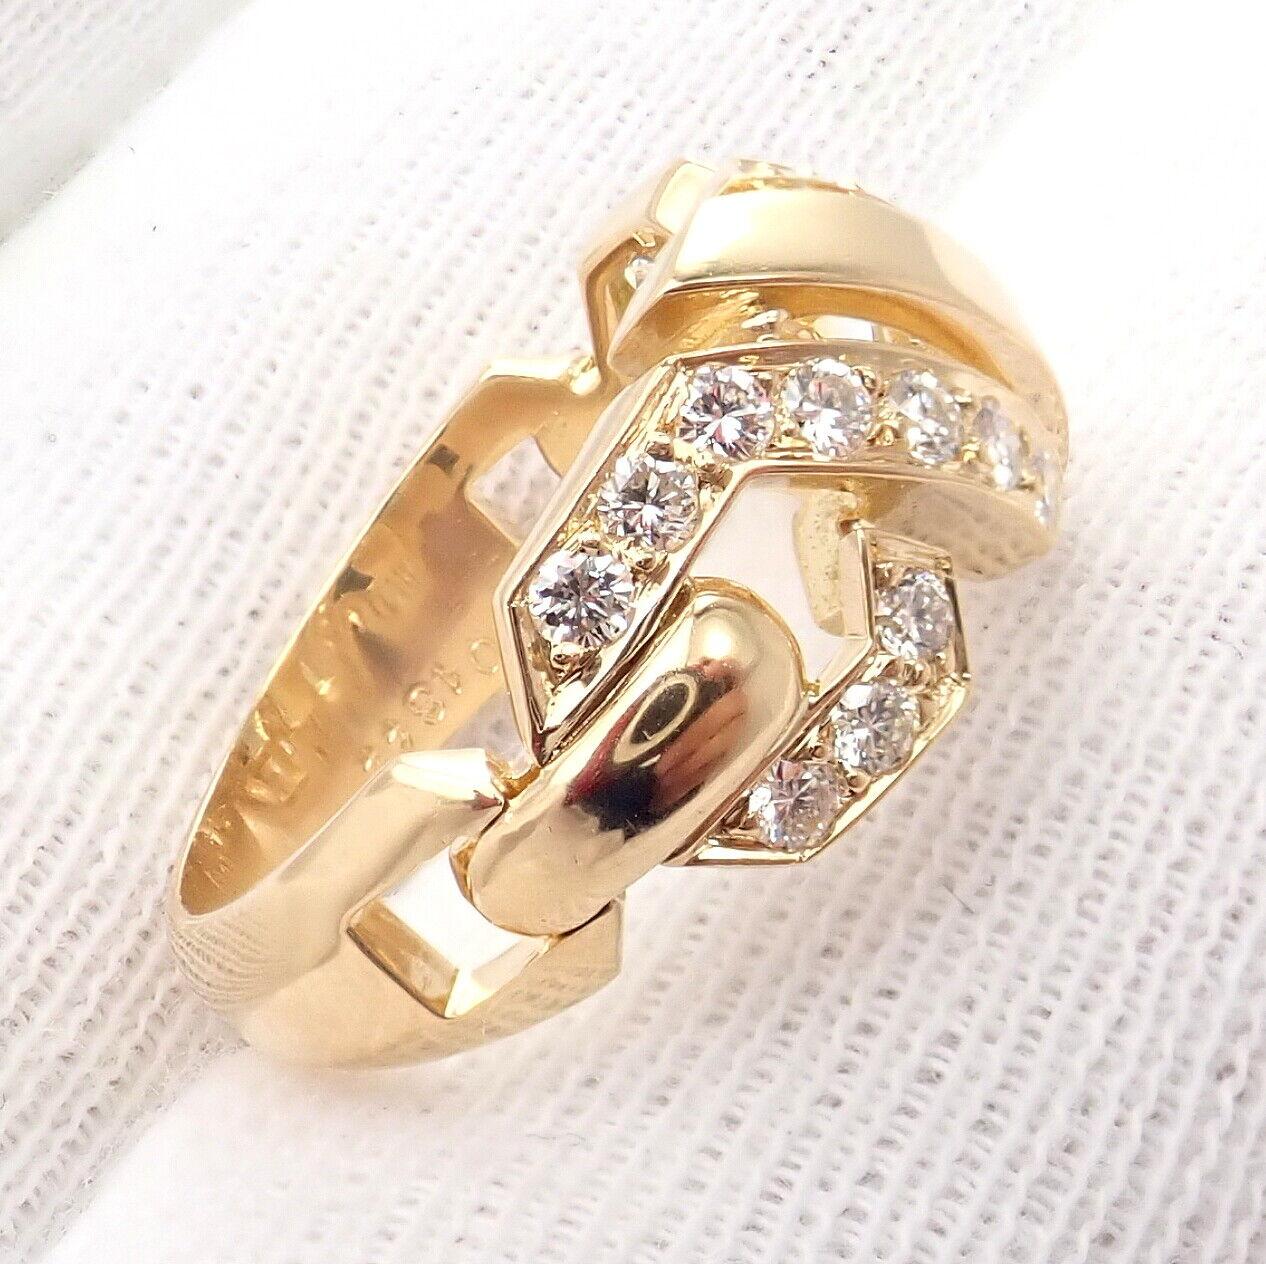 Cartier Fox Trot Diamond Yellow Gold Ring In Excellent Condition For Sale In Holland, PA